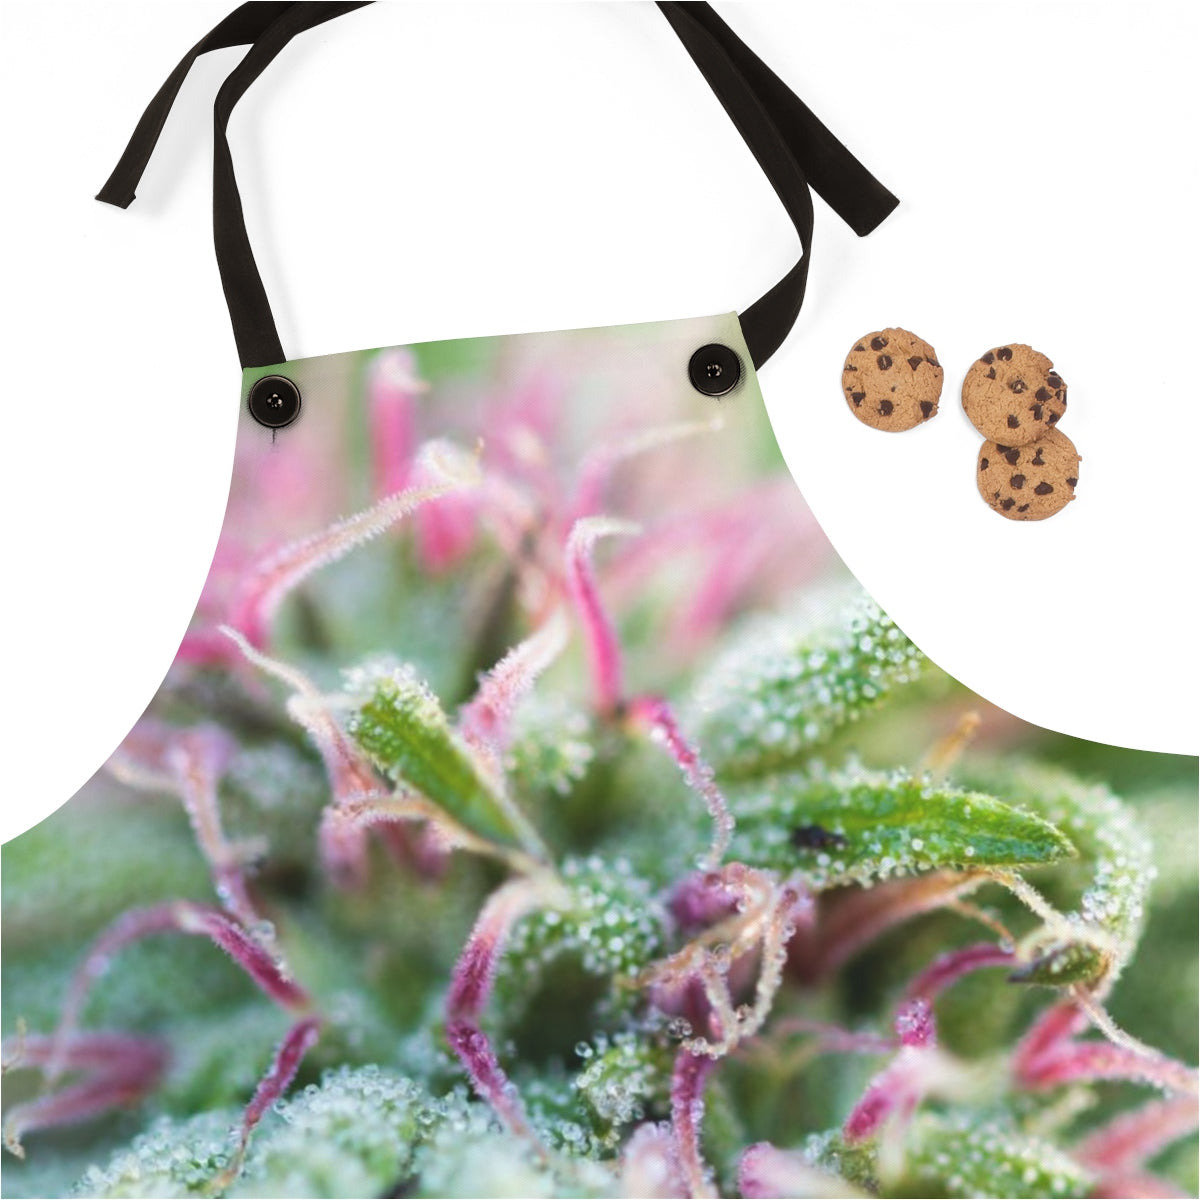 Blooming With Purple Cannabis Apron